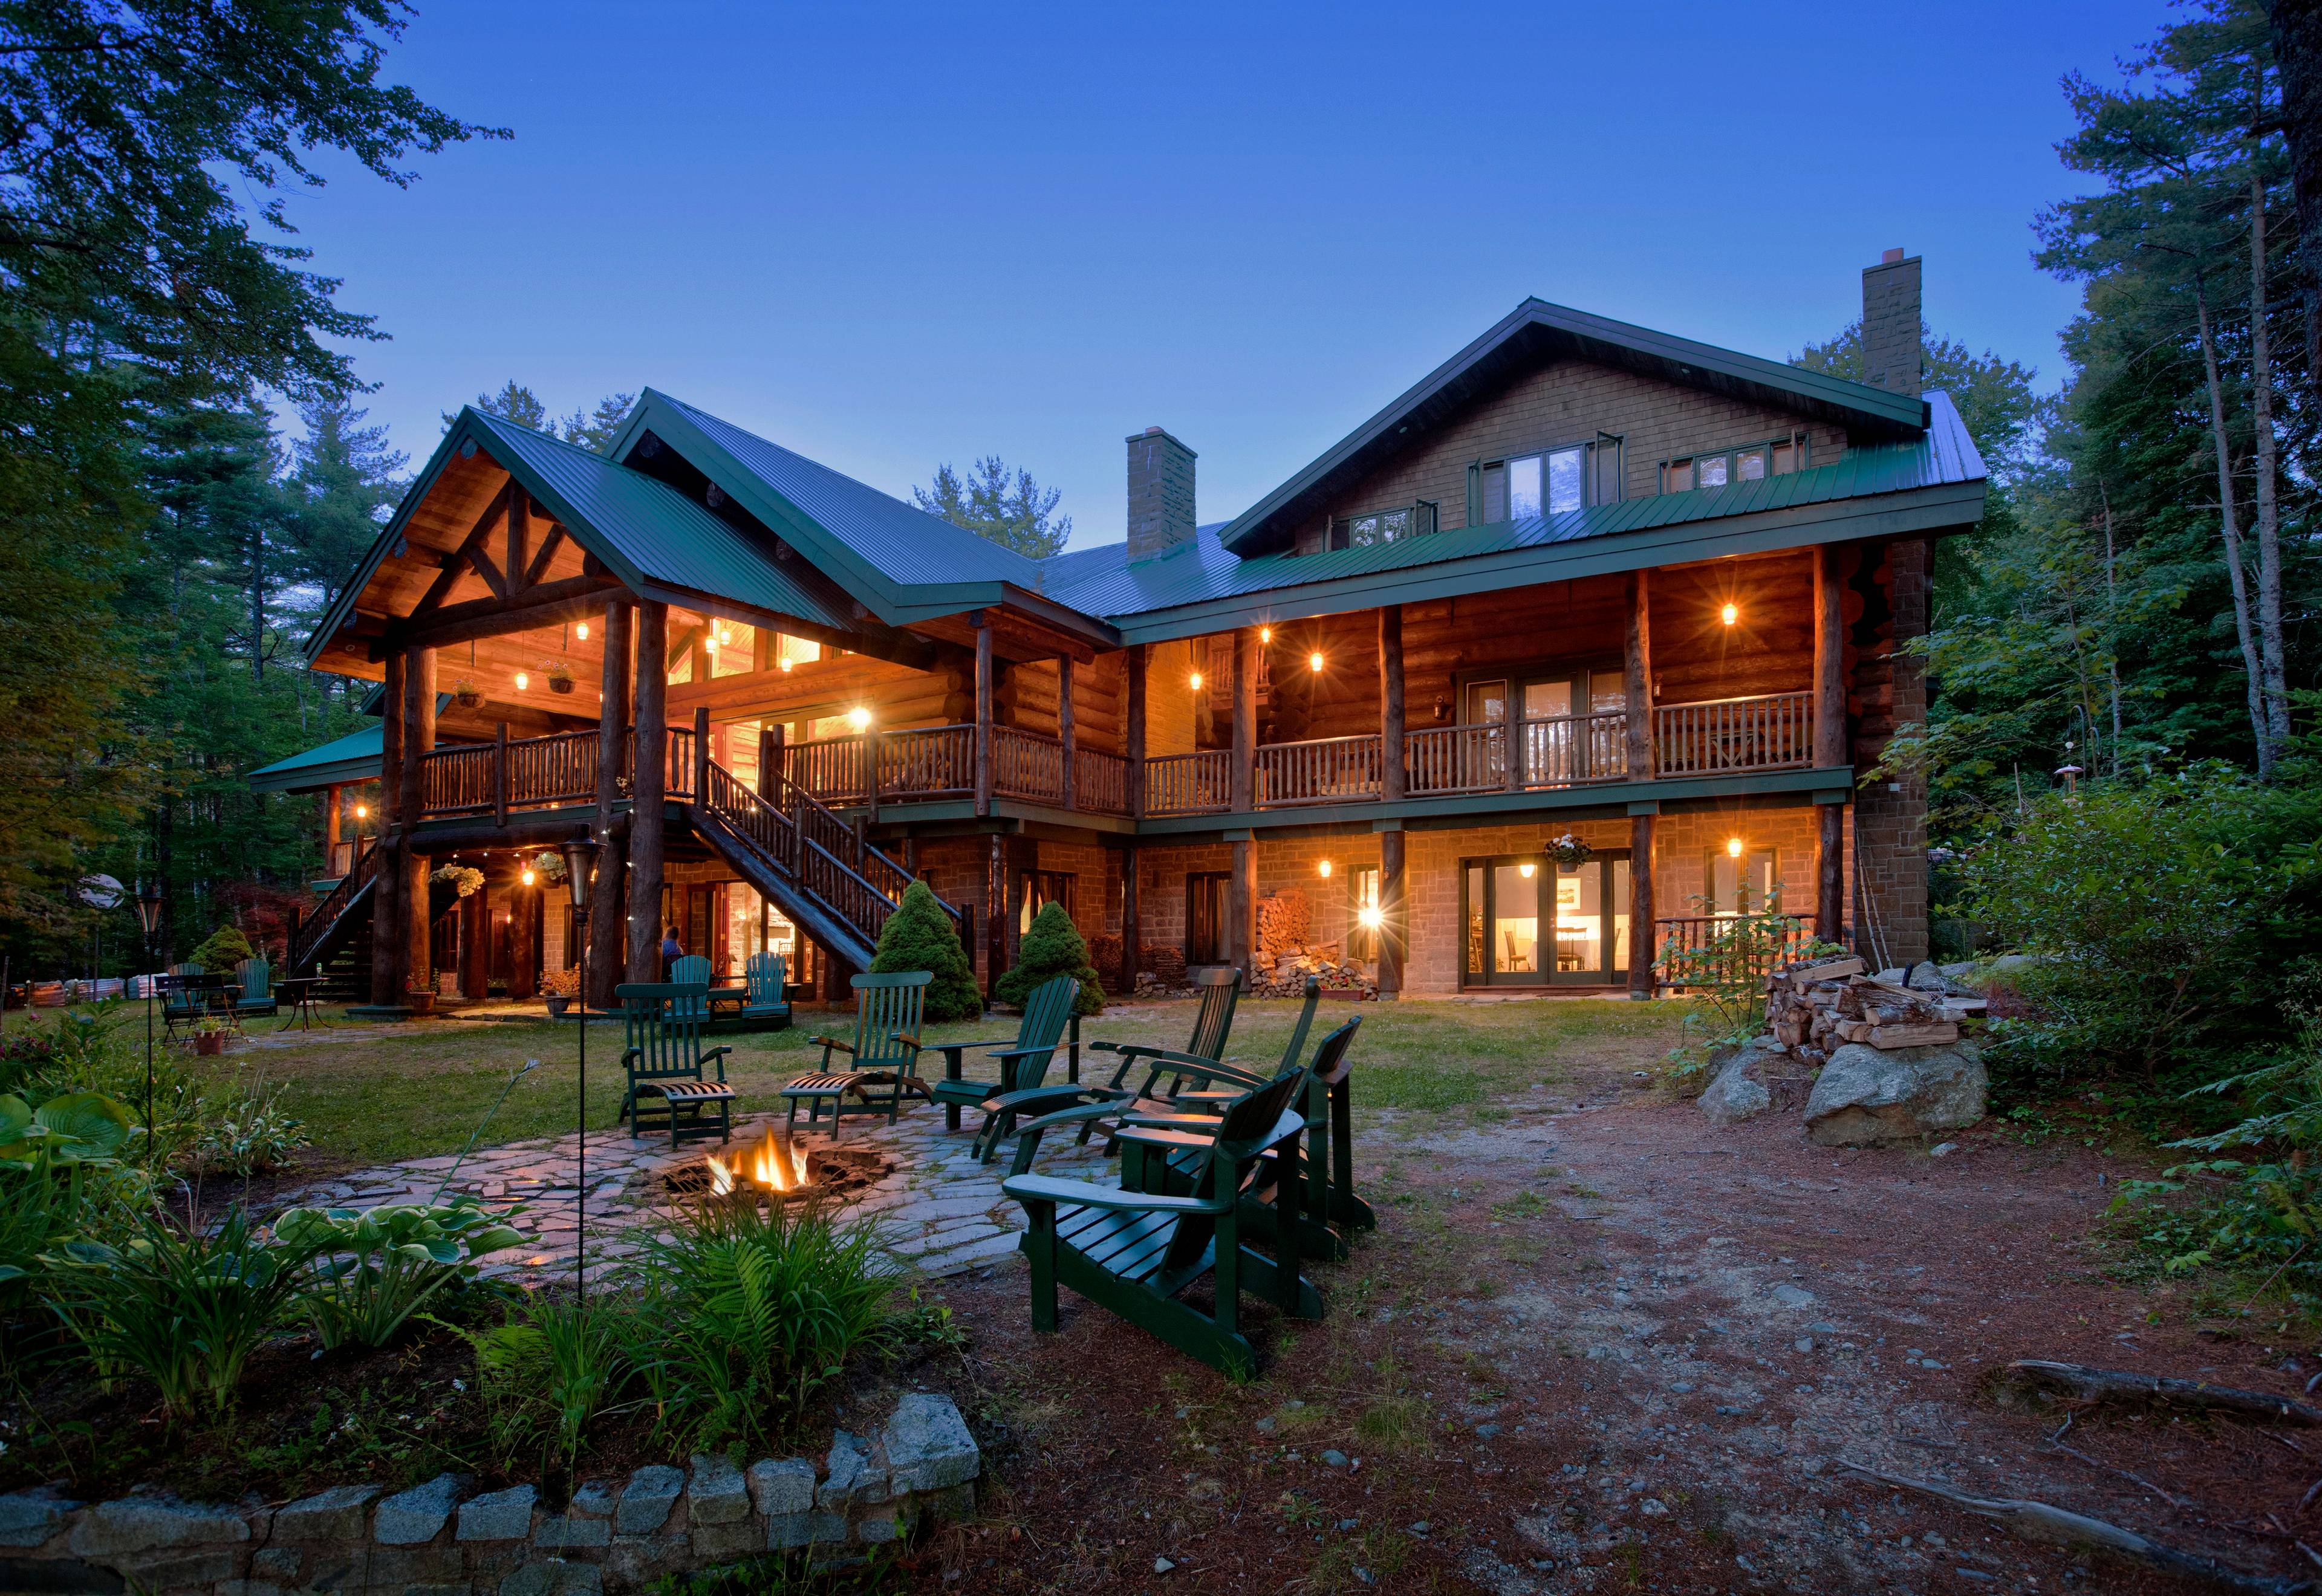 Luxury Wilderness Lodge for Sale - Nova Scotia Canada - Sold - Other Properties Available!